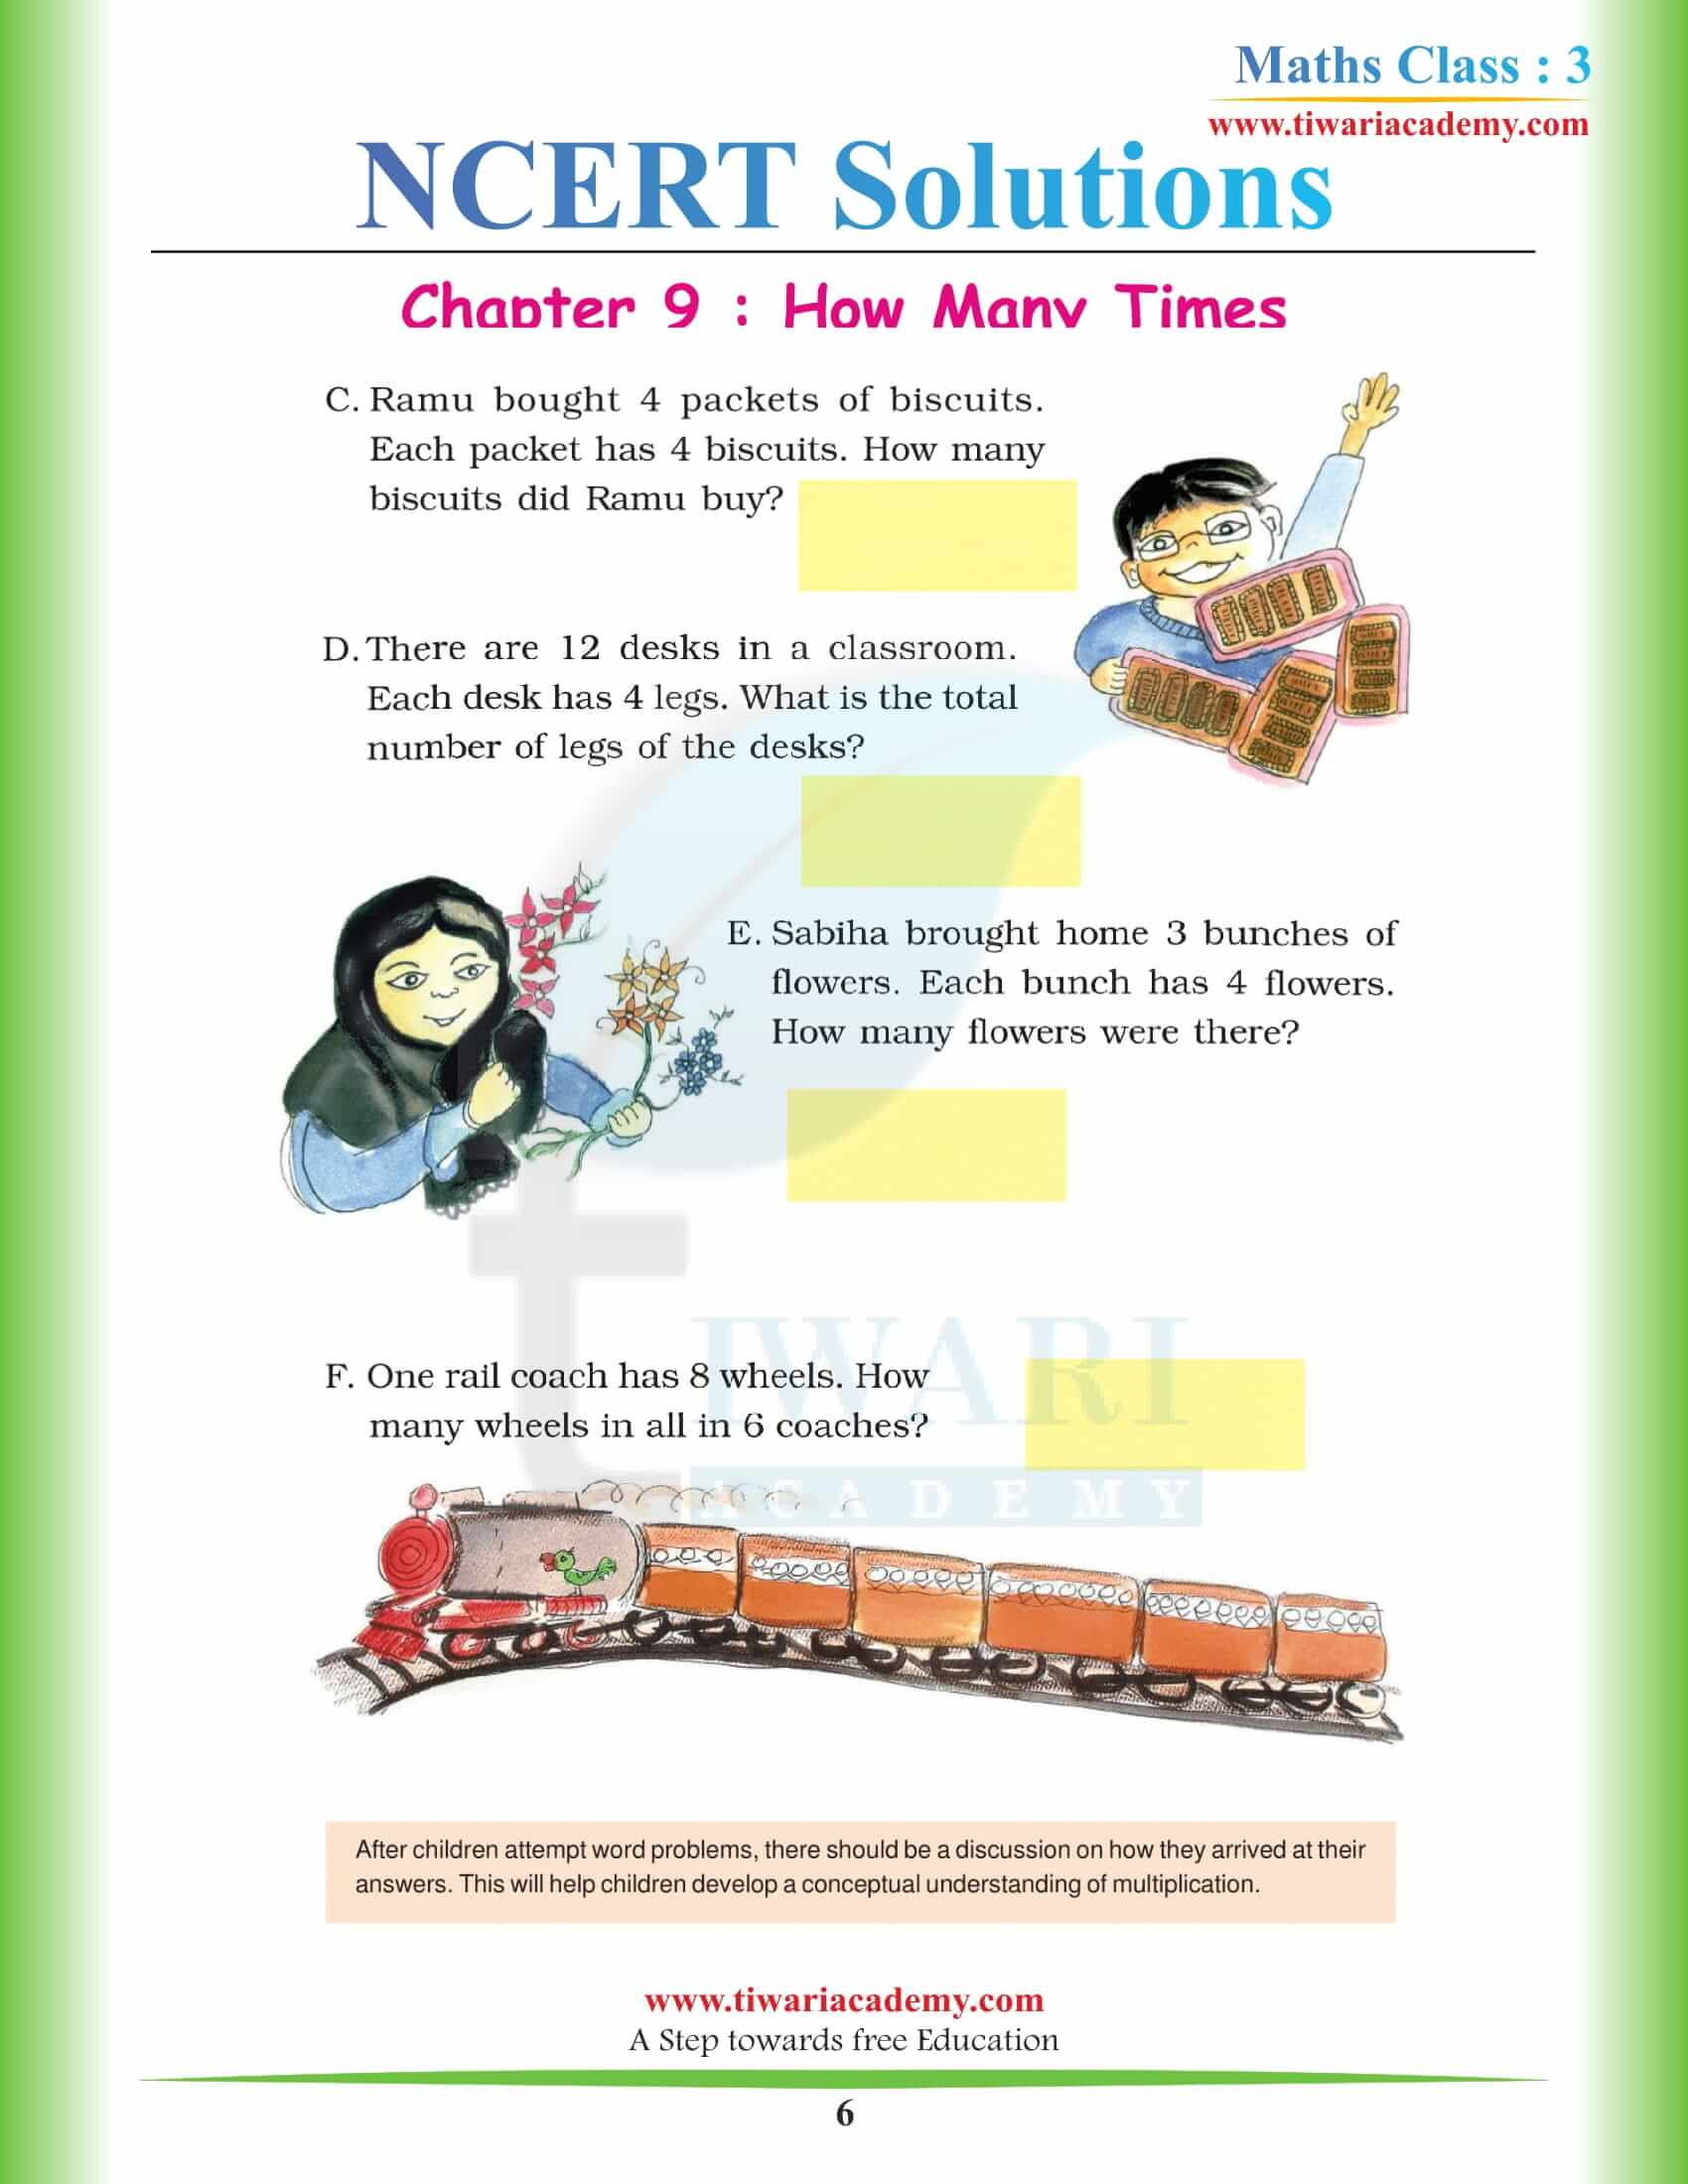 NCERT Solutions for Class 3 Maths Chapter 9 free to download